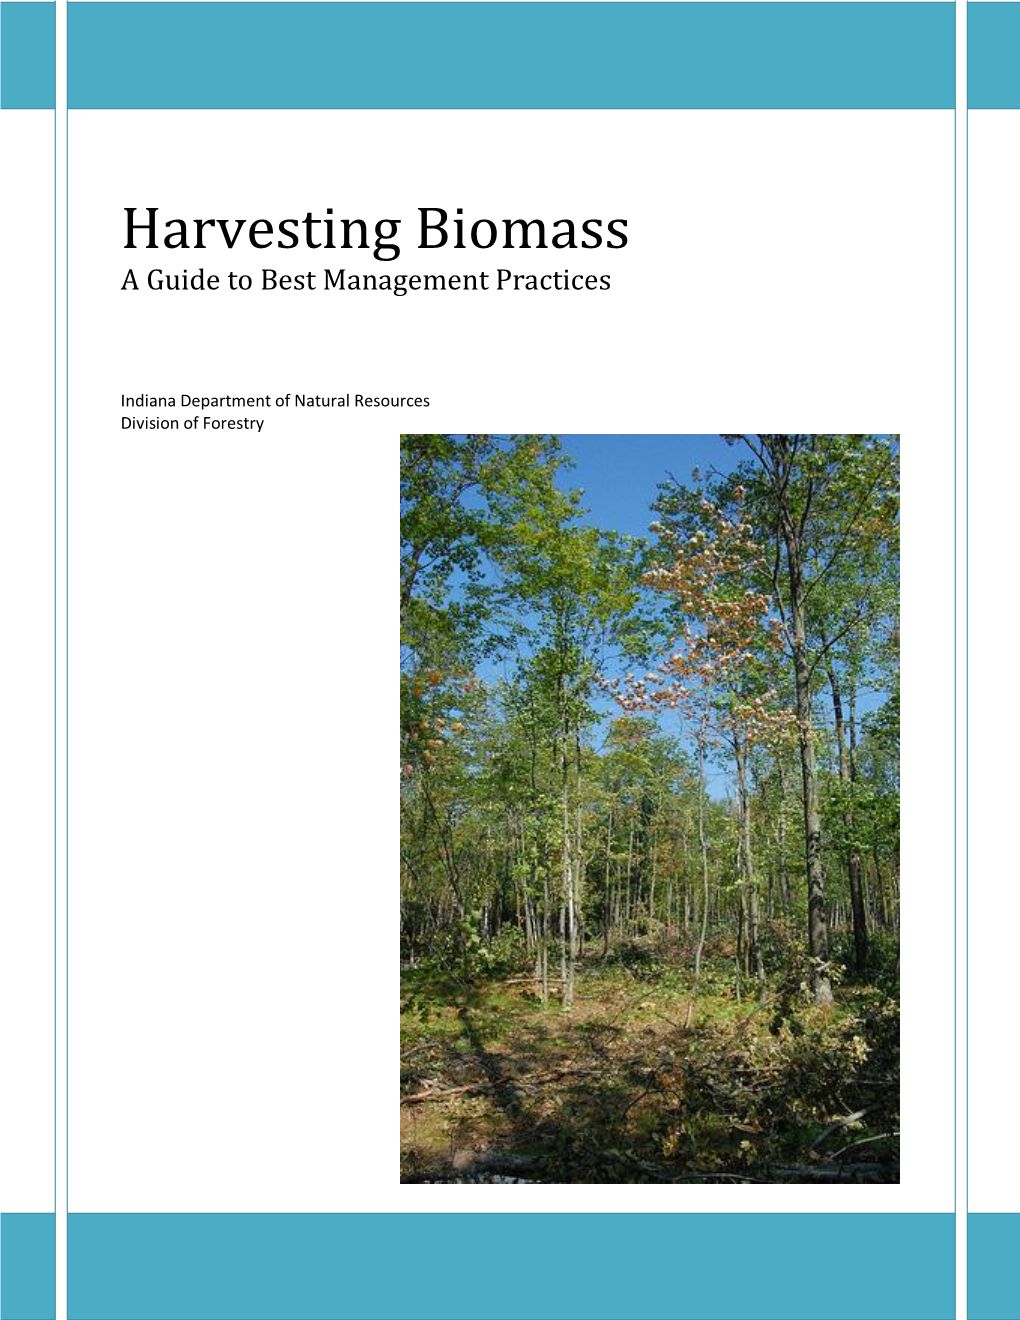 Harvesting Biomass: a Guide to Best Management Practices